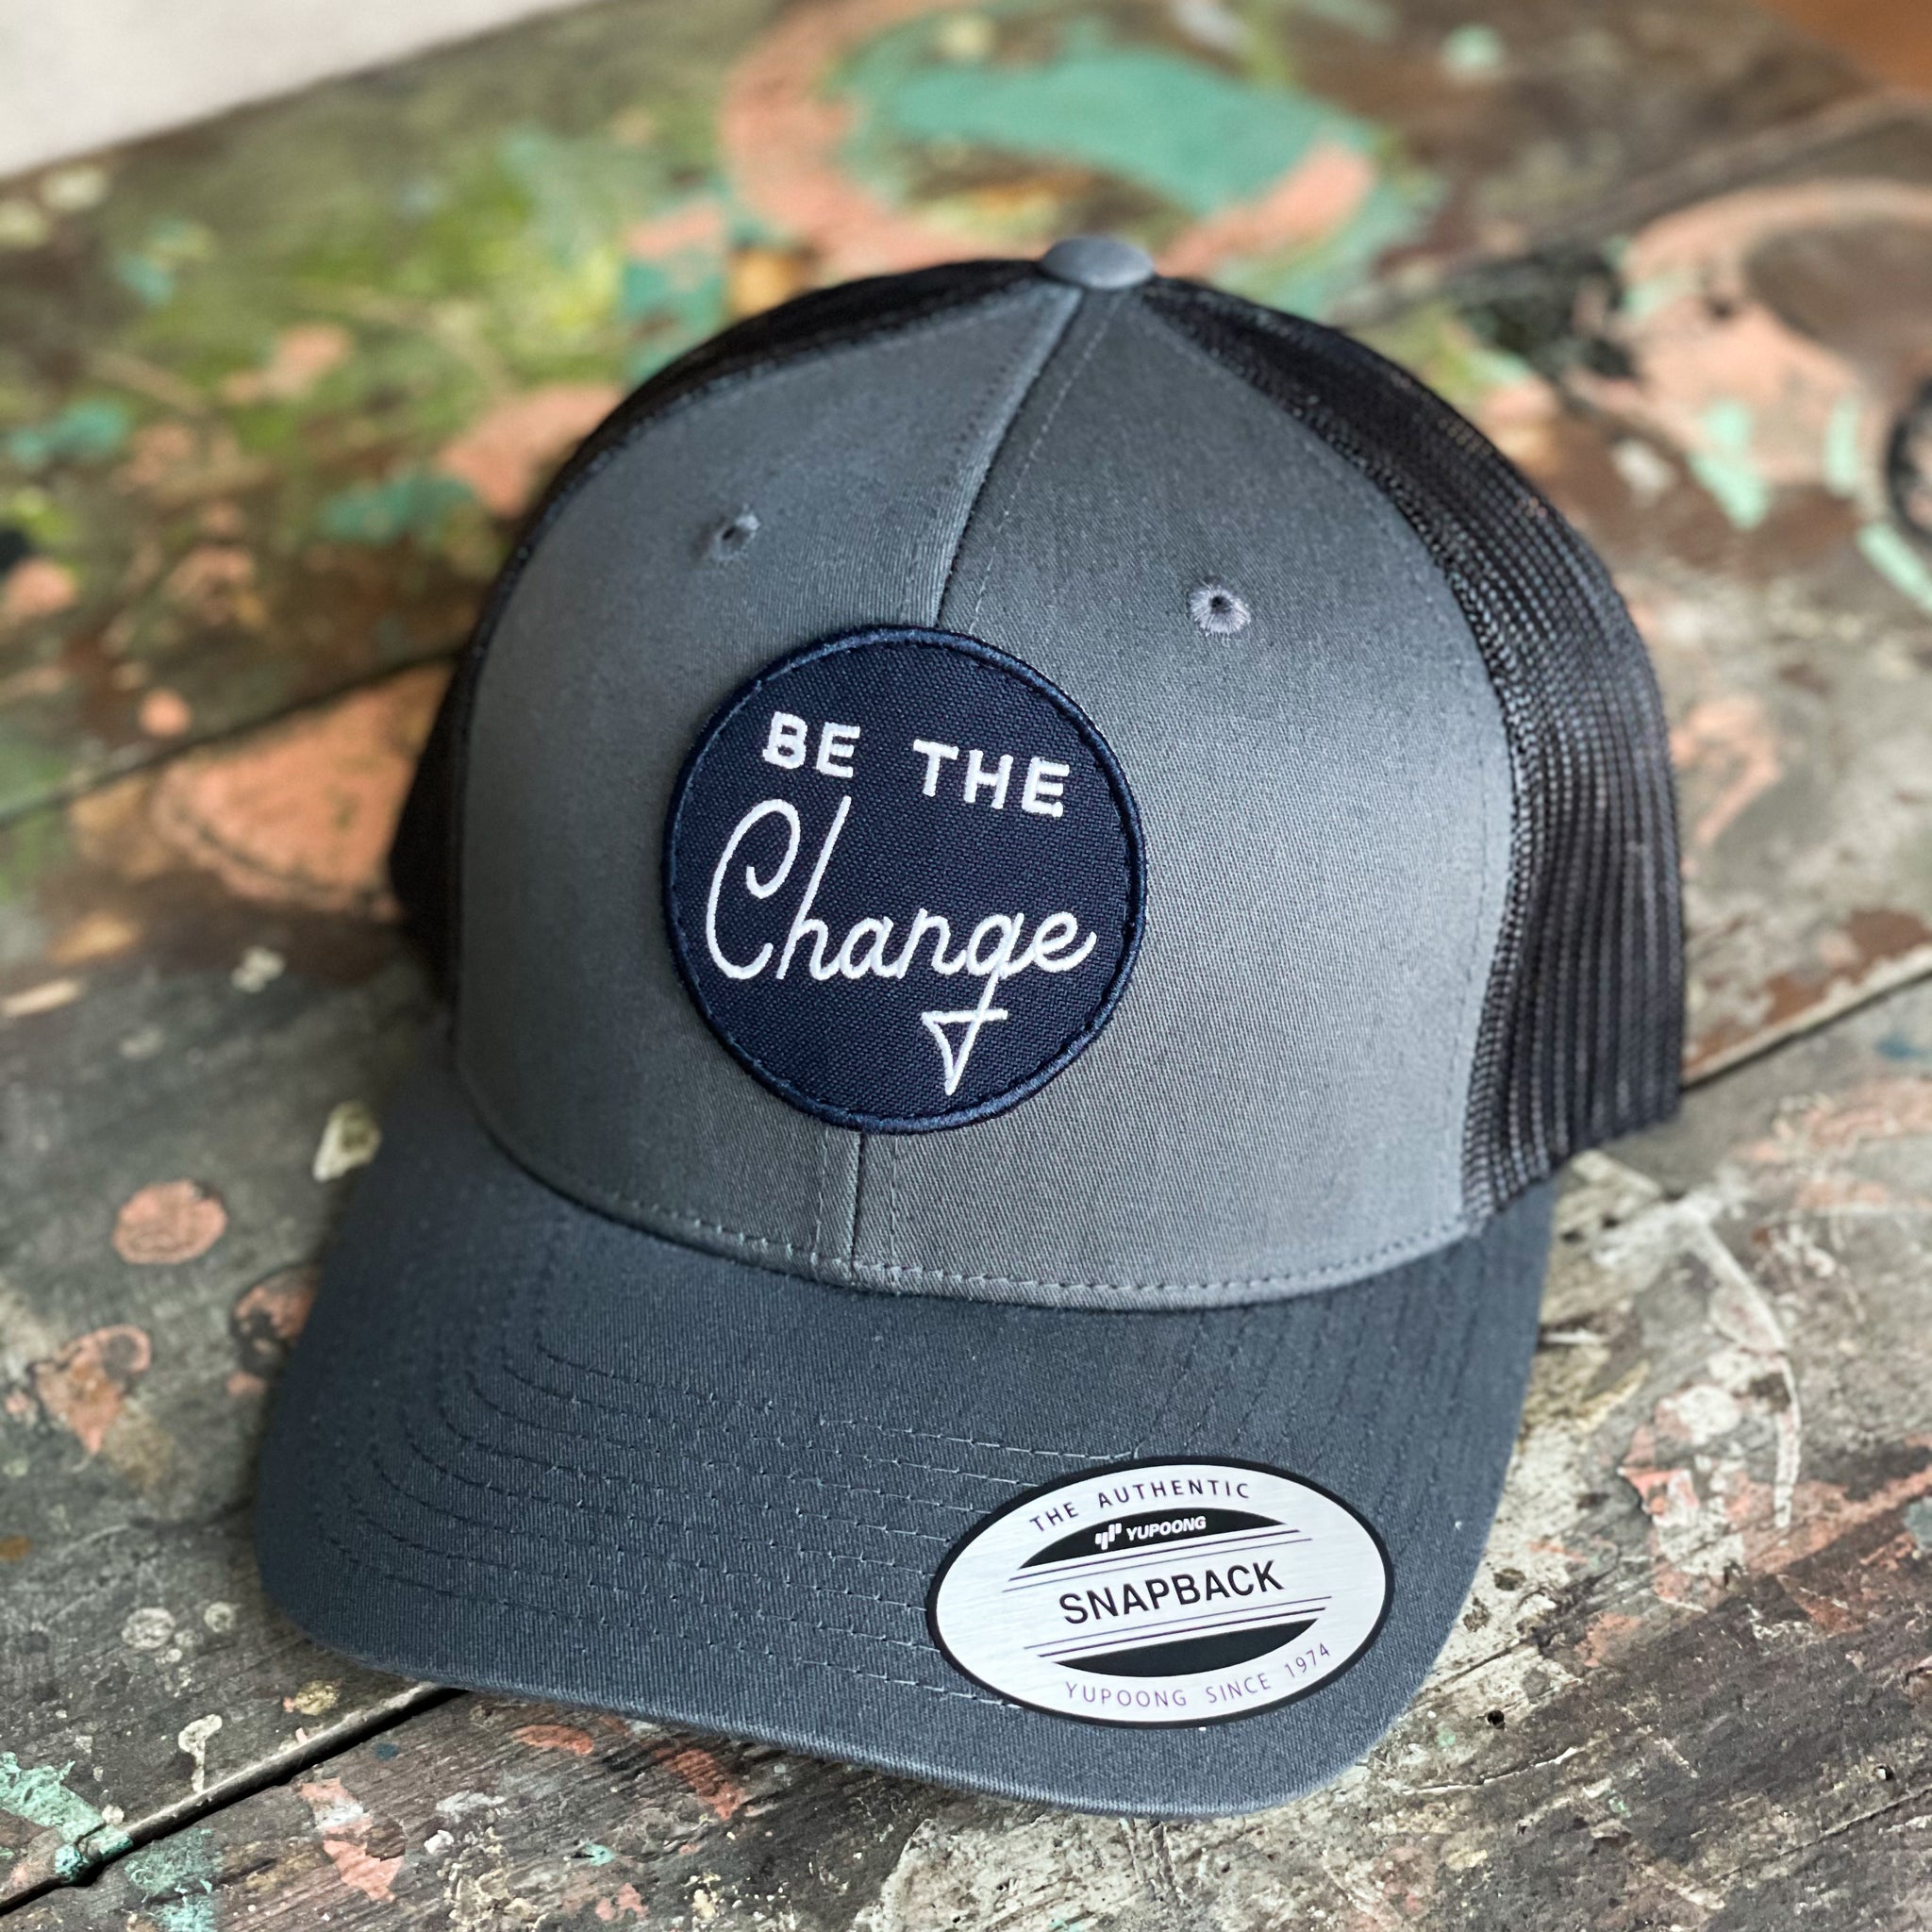 Be the change trucker style hat